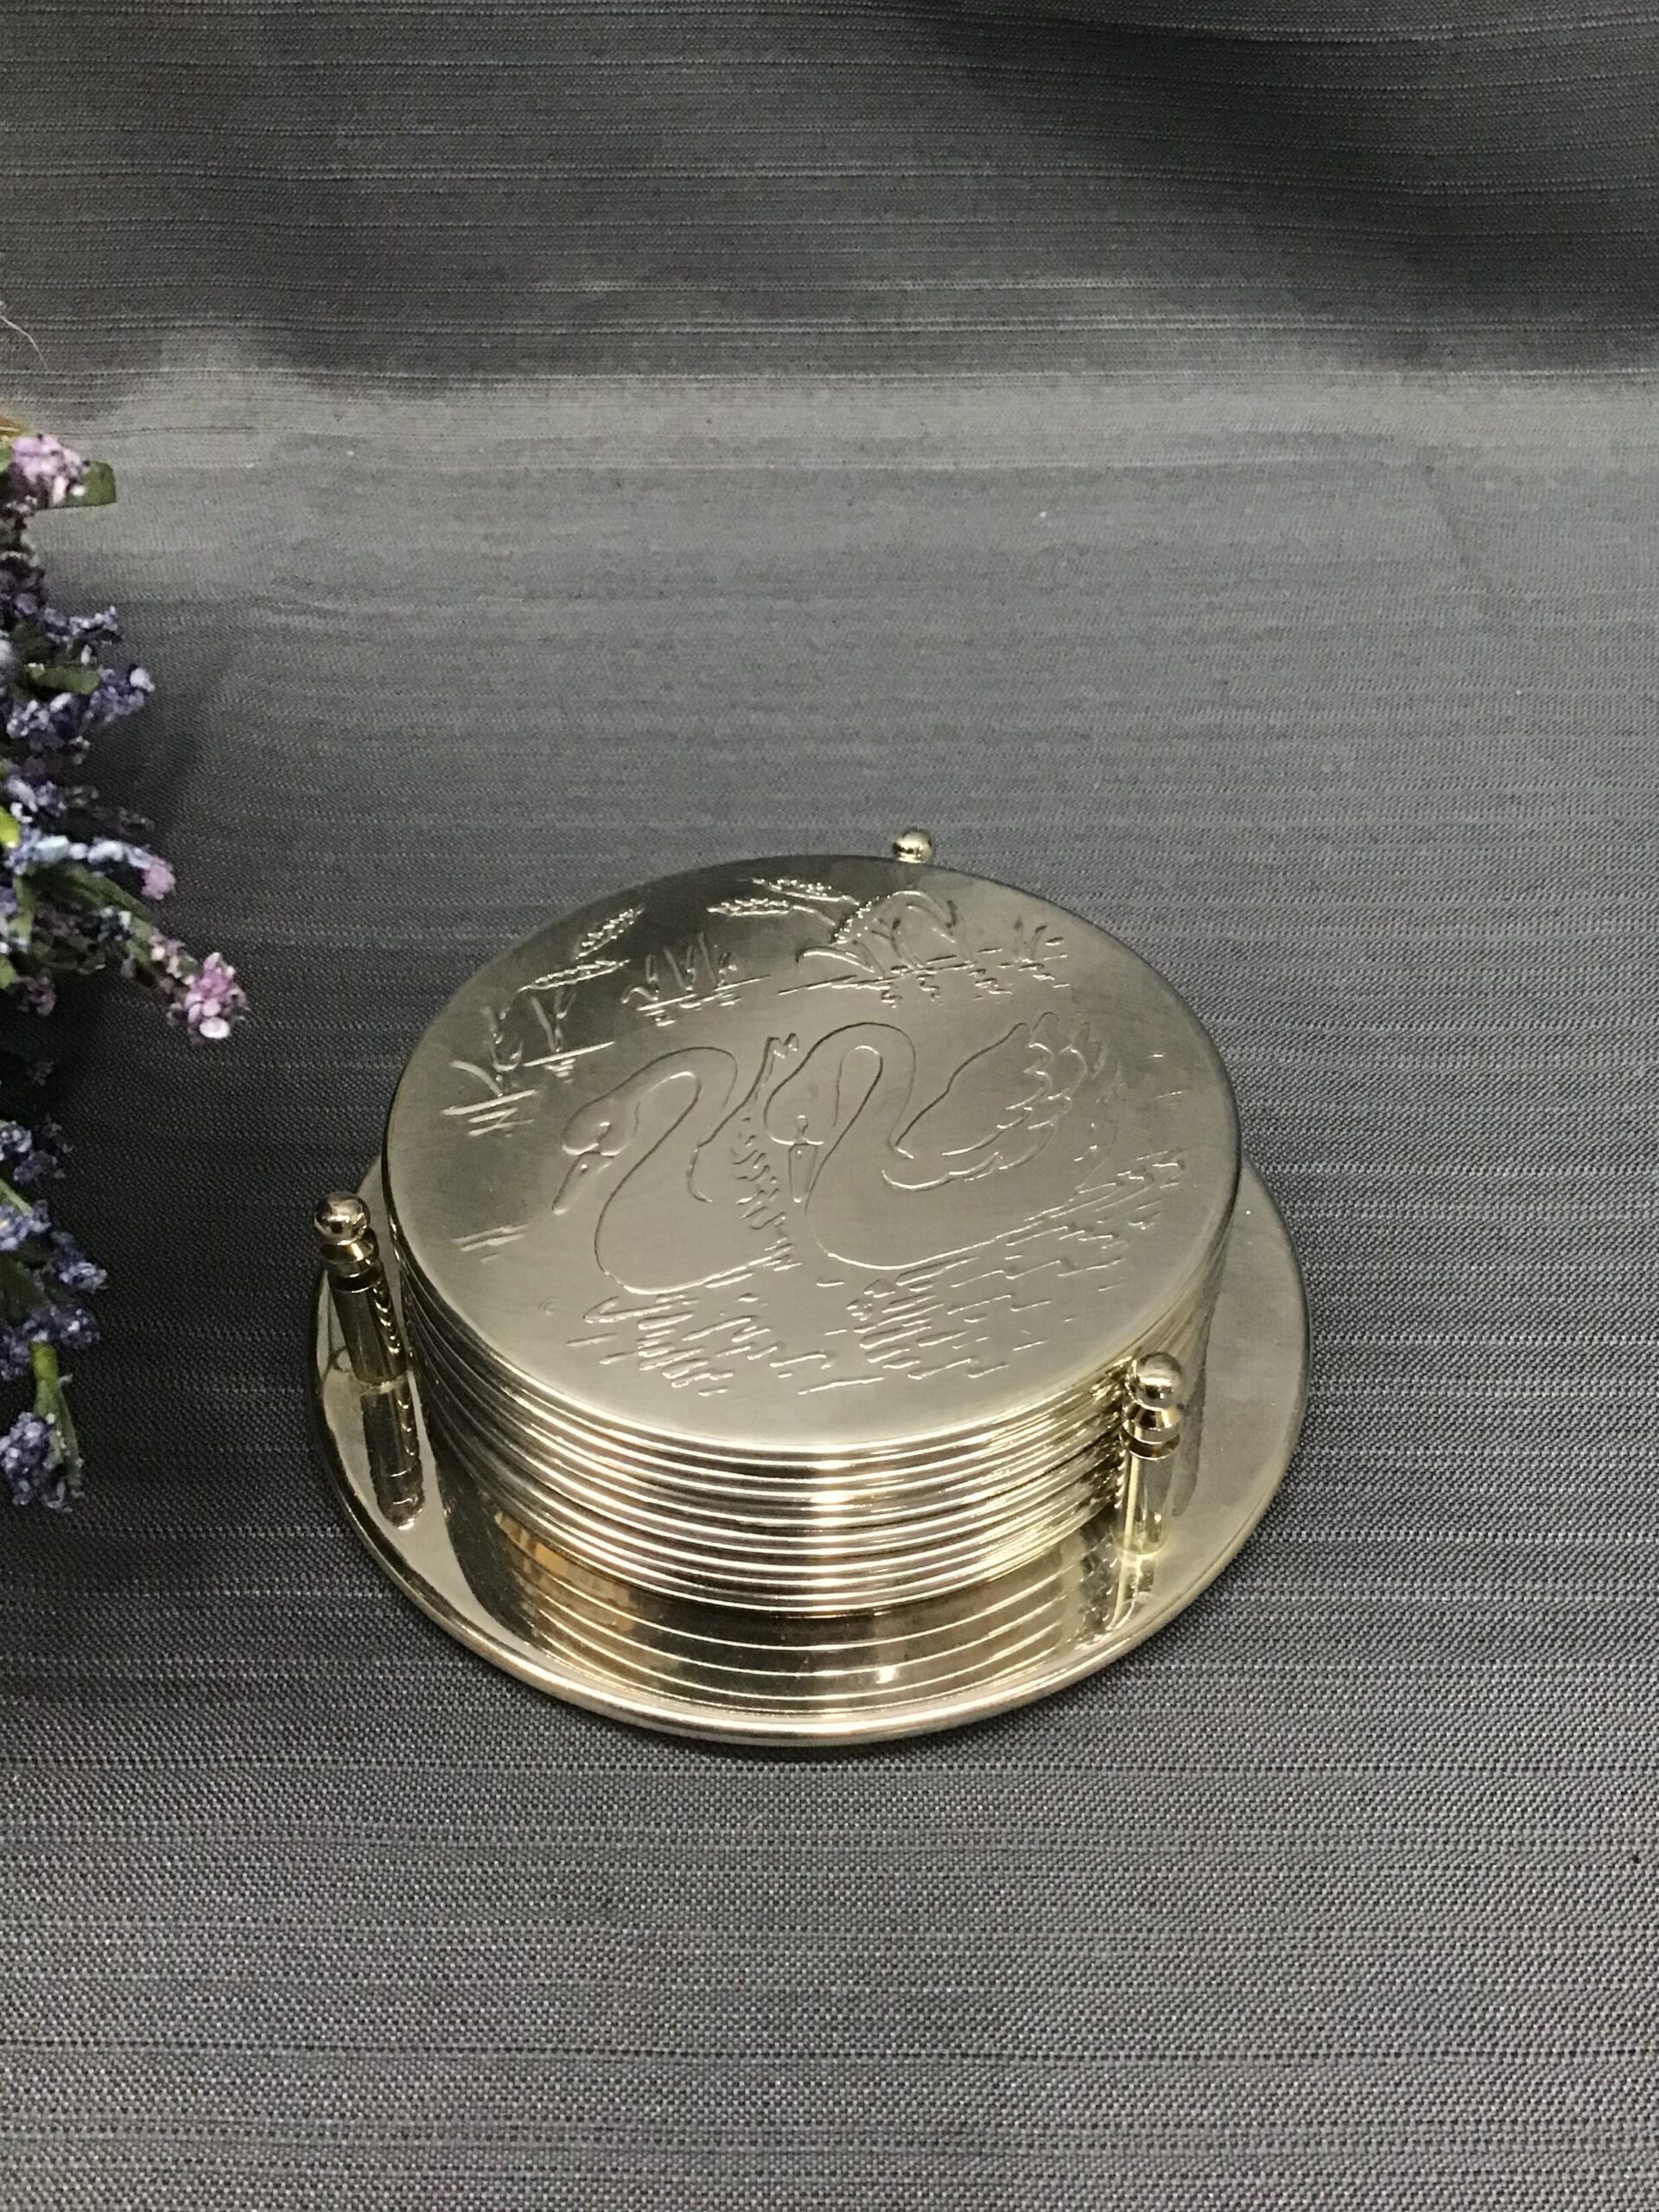 Silver “Swan” Coaster Set of 6 (in Stand)